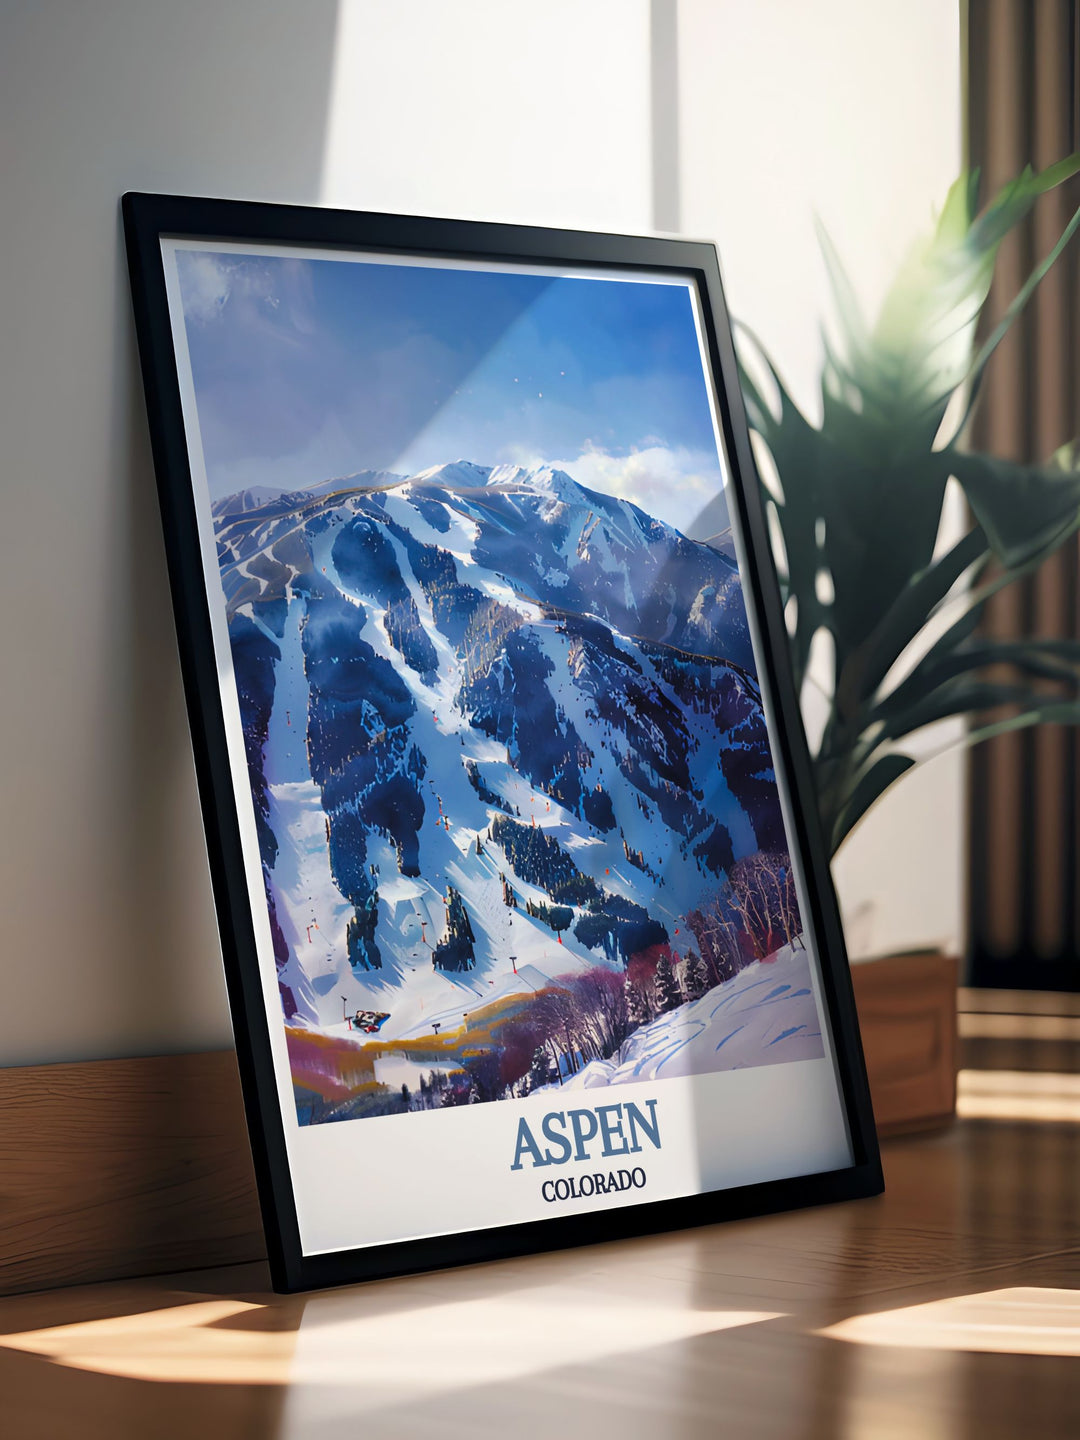 Aspen Highlands, with its challenging ski slopes and breathtaking vistas, is beautifully captured in this art print. Perfect for adding a touch of Colorados mountain beauty to your decor.